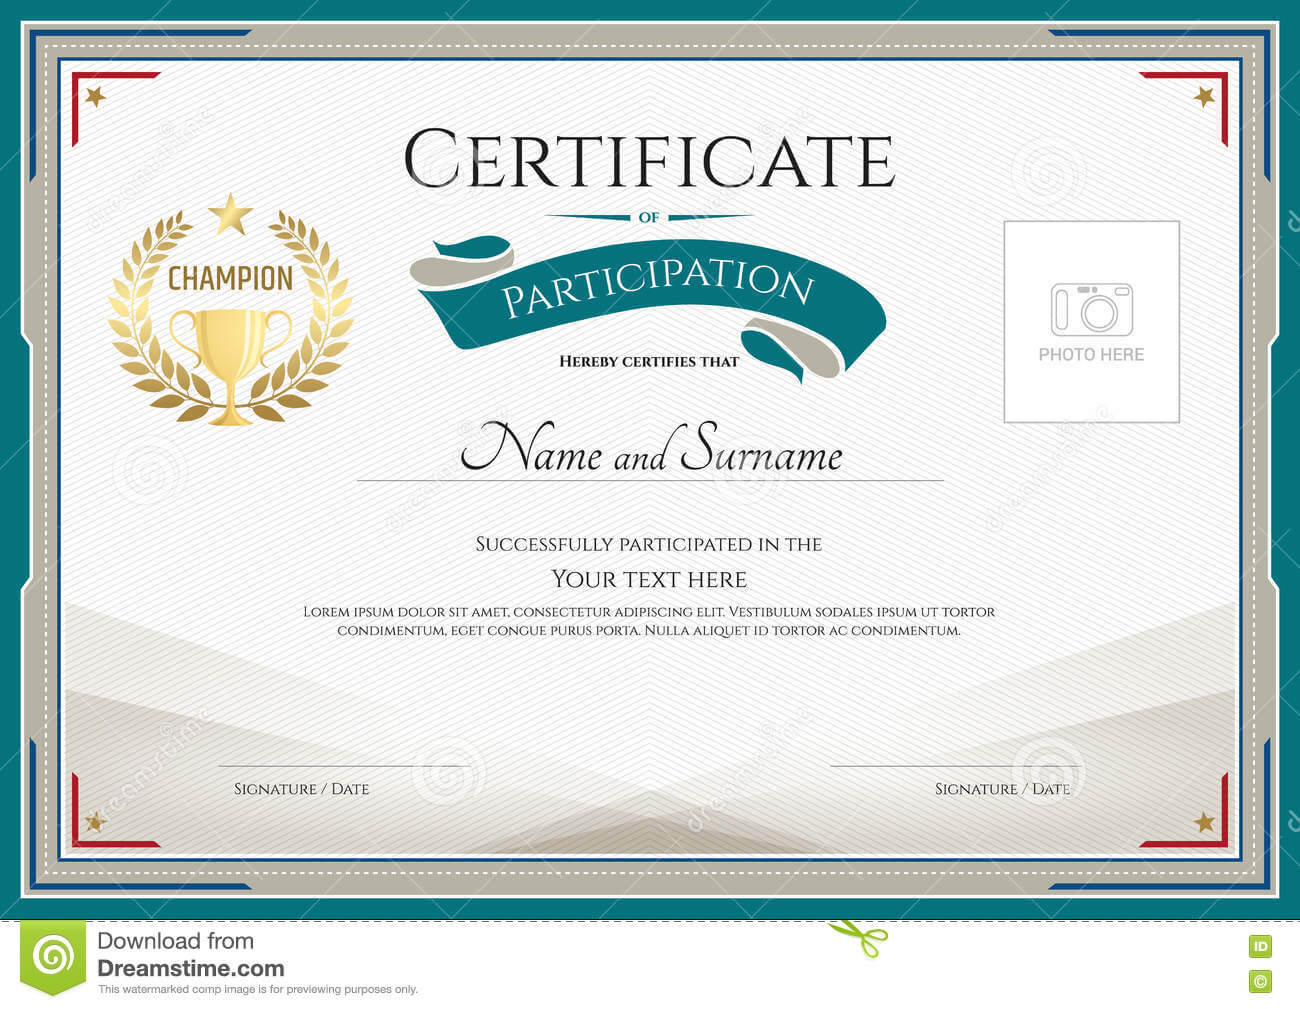 Participation Certificate Templates Free Download – Bolan Within Blank Certificate Templates Free Download